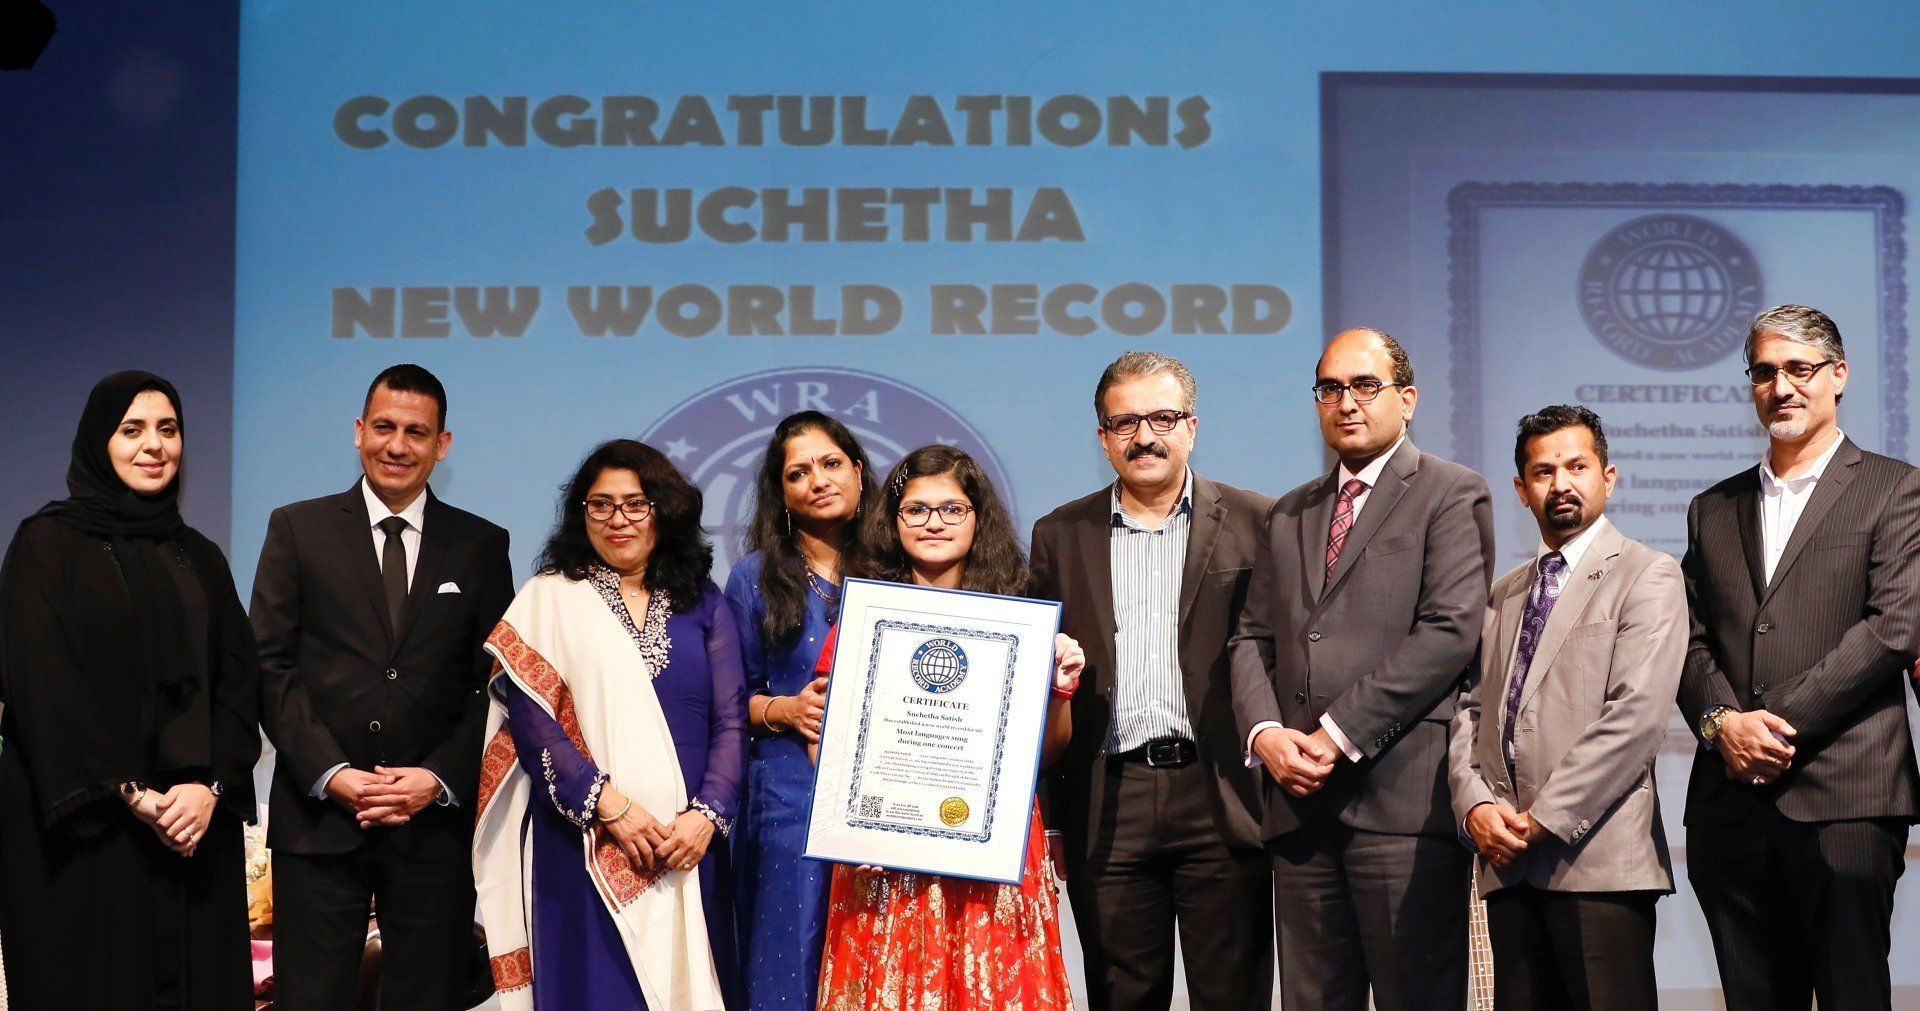 Most Languages Sung during one Concert: world record set by Suchetha Satish